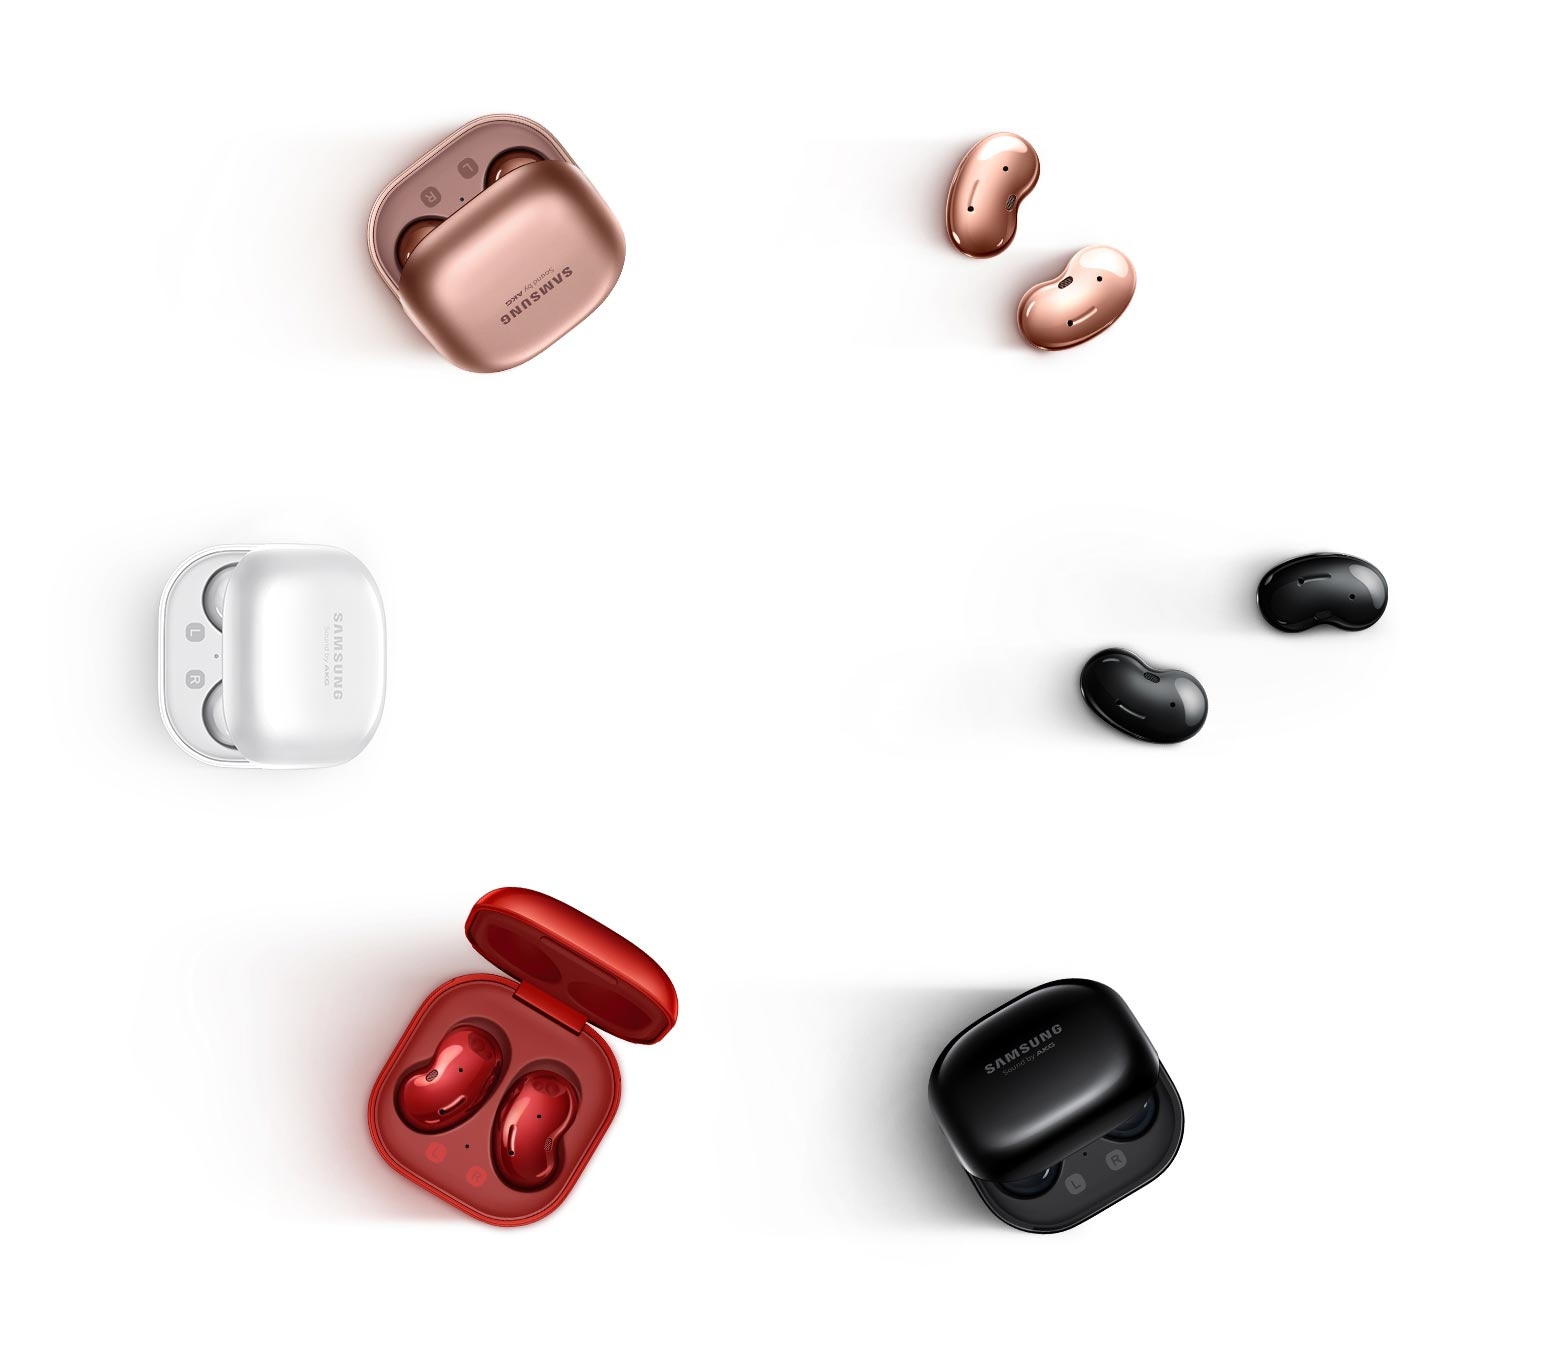 There are 6 Galaxy Buds Live in different colors placed in a circle. Starting from the top going clockwise, two pairs of earbuds in Mystic Bronze and Onyx are next to each other. And then there's Onyx, Mystic Red, Mystic White, and Mystic Bronze Galaxy Buds Live cases and earbuds.